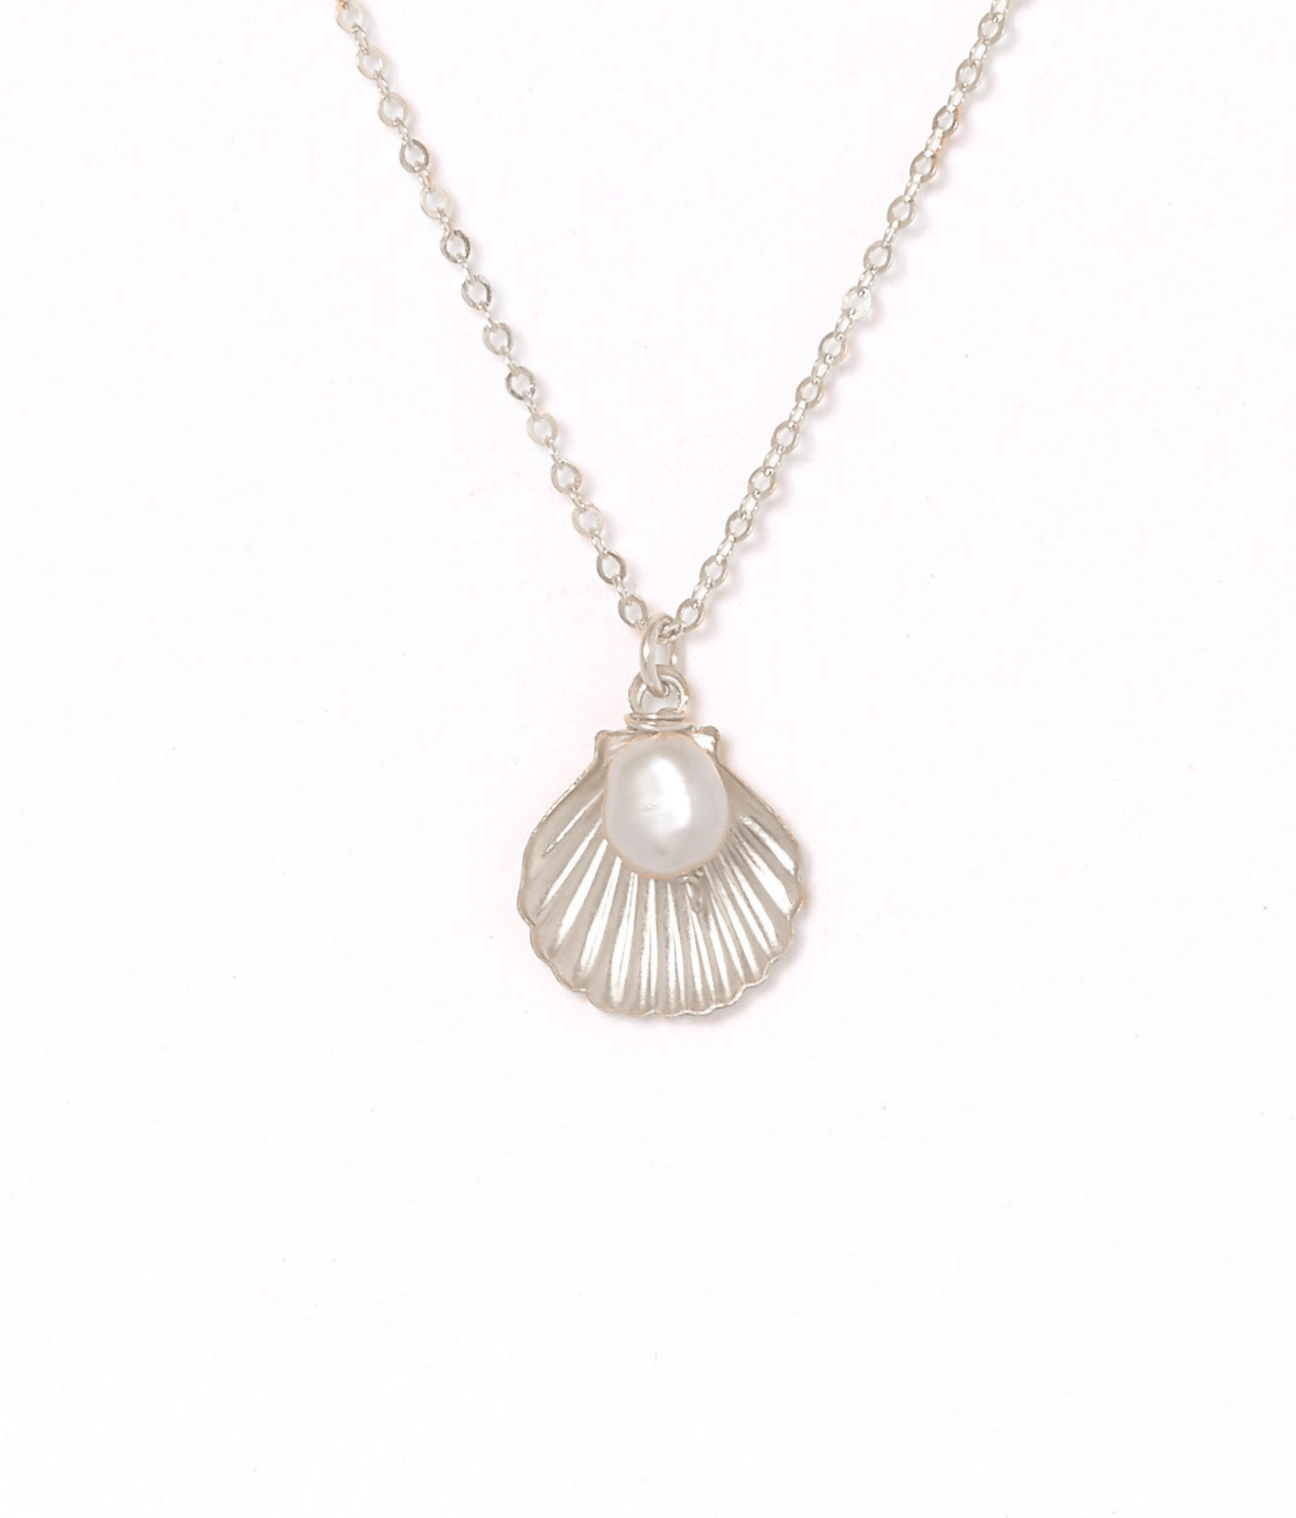 Belle Necklace by KOZAKH. A 16 to 18 inch adjustable length necklace in Sterling Silver, featuring a 5mm flat irregular Pearl and a Shell charm.